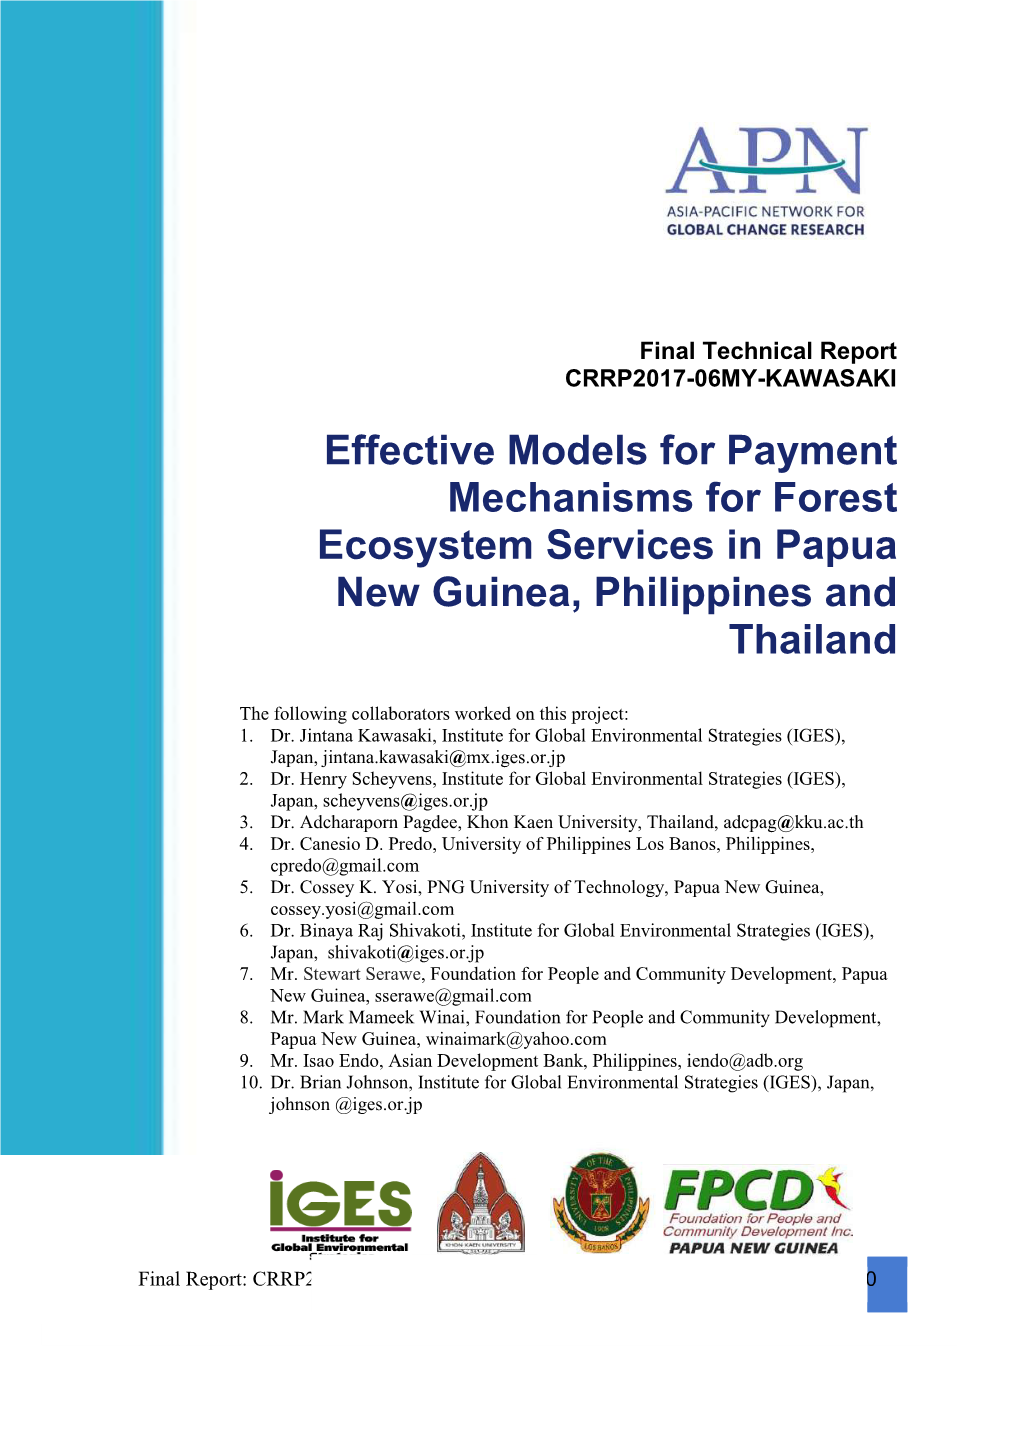 Effective Models for Payment Mechanisms for Forest Ecosystem Services in Papua New Guinea, Philippines and Thailand